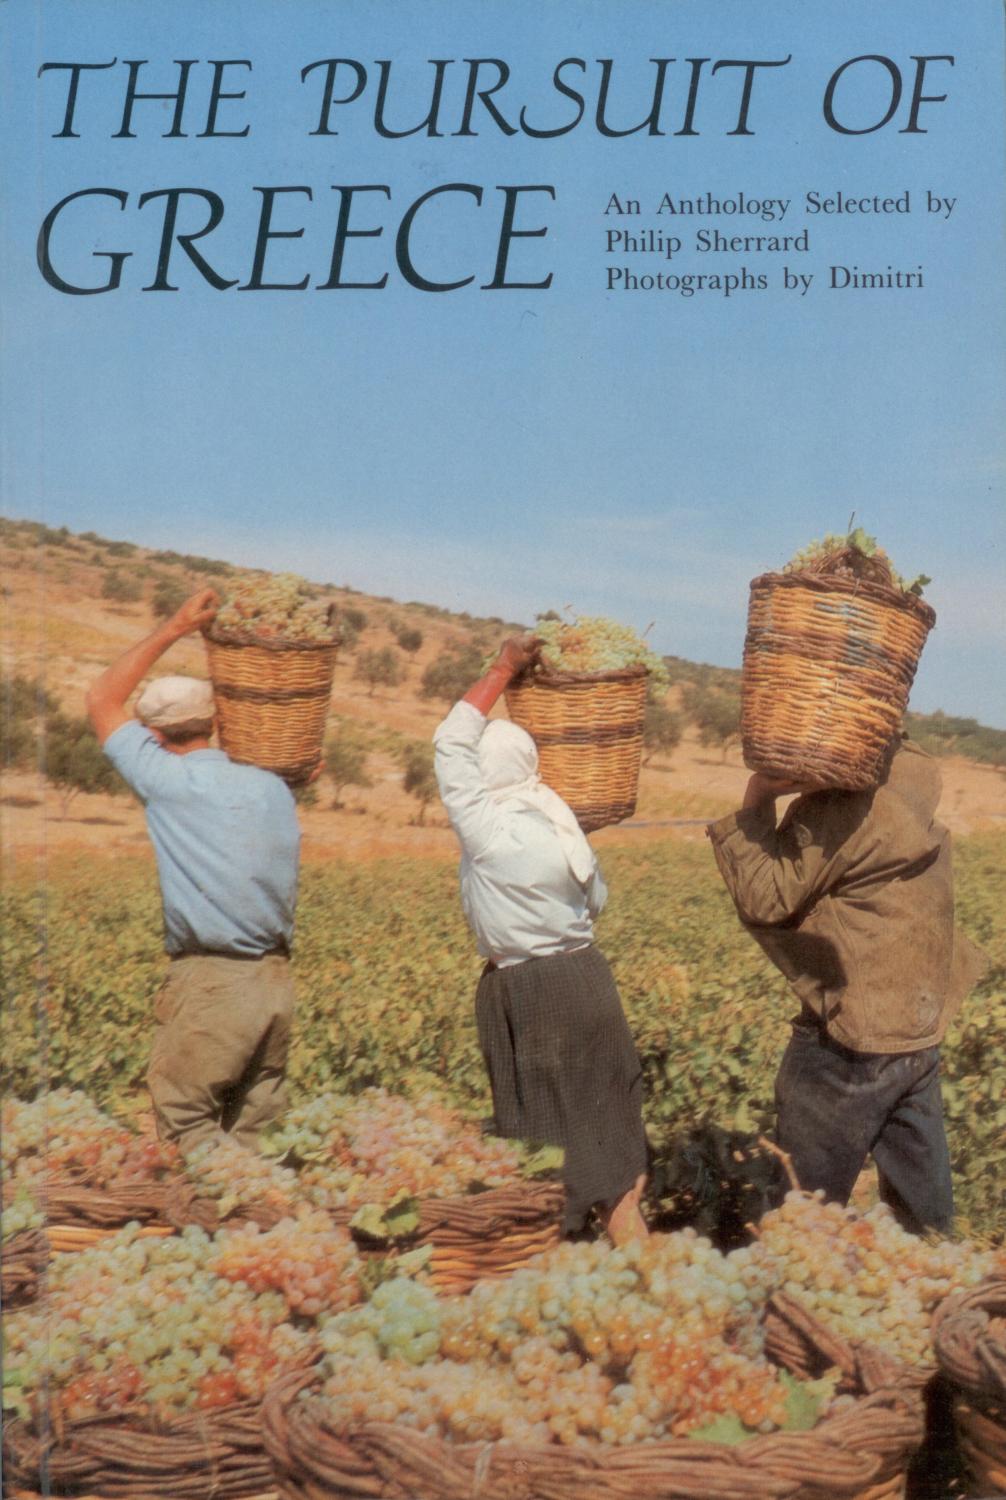 The Pursuit of Greece - Sherrard, Philip, Photographs by Dimitri